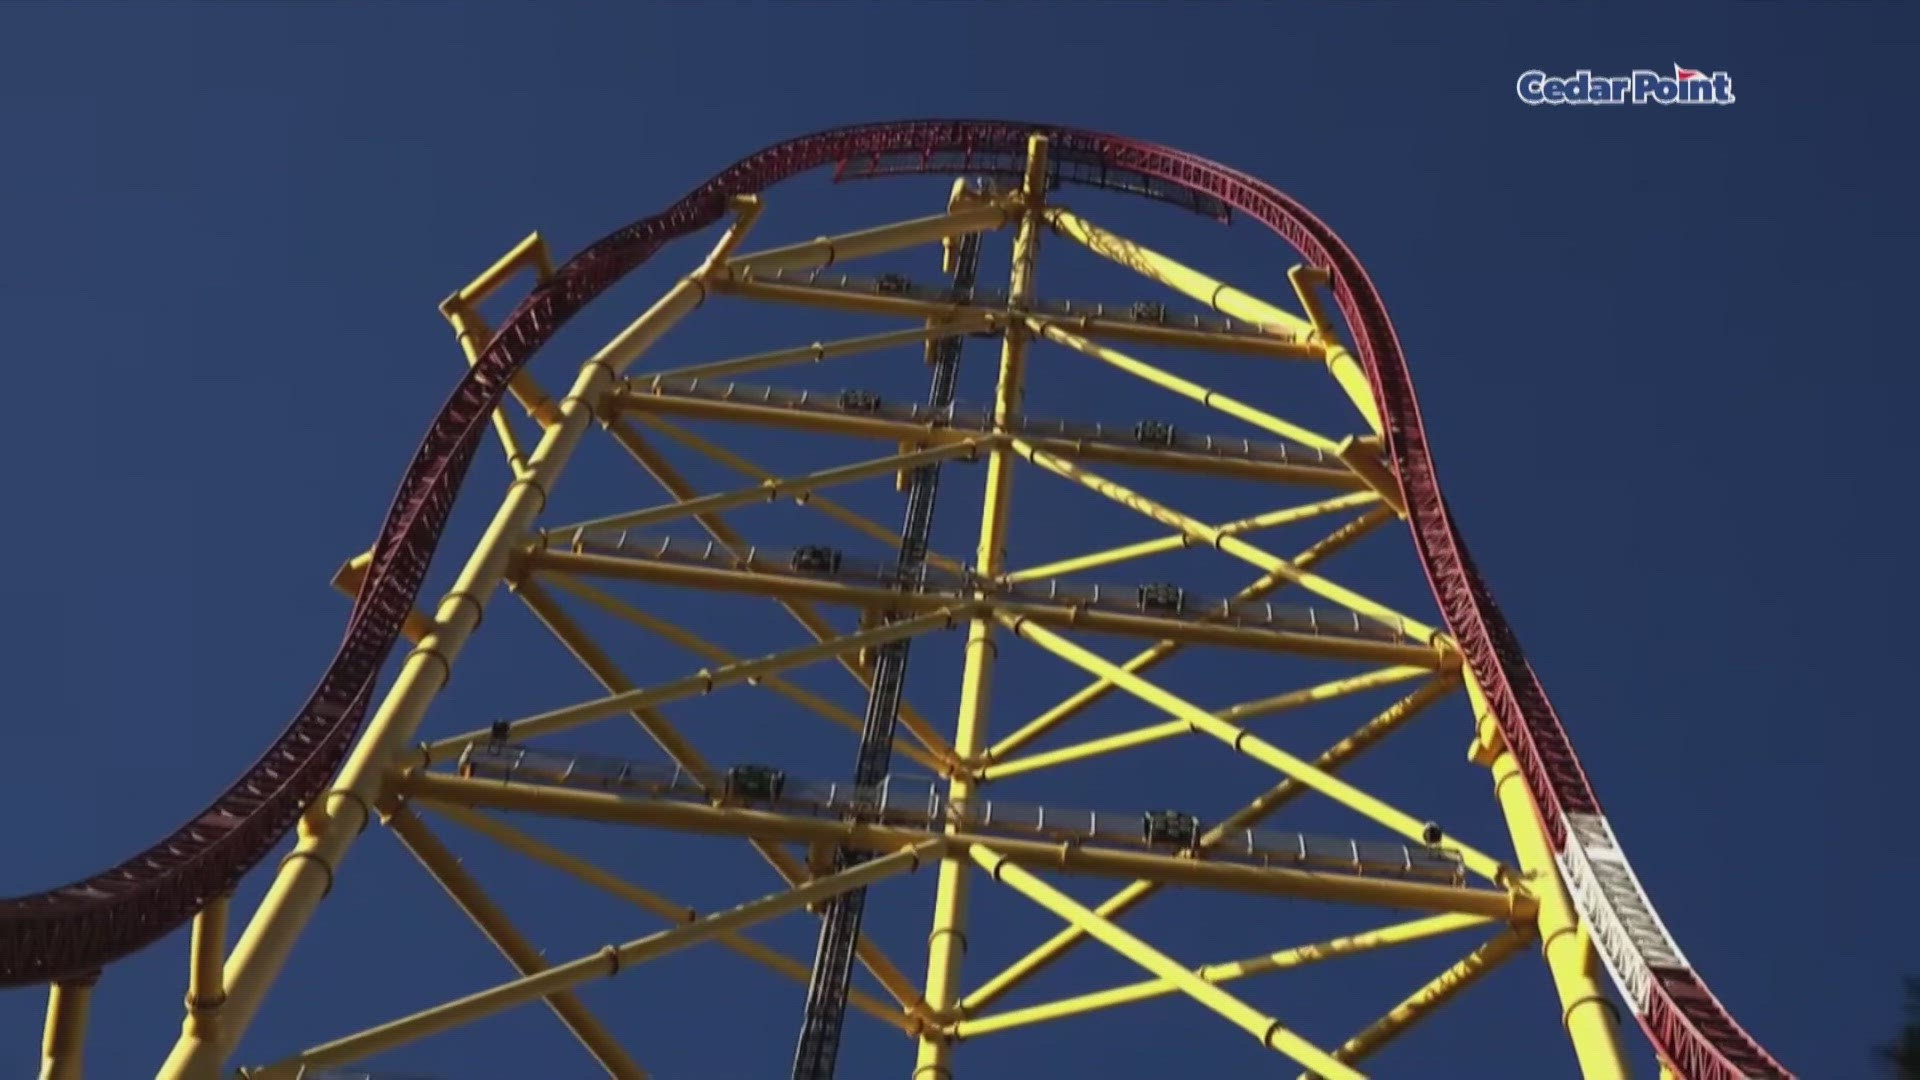 Top Thrill Dragster was closed after the accident, but an updated version of the ride is set to make its debut for the 2024 season known as Top Thrill 2.